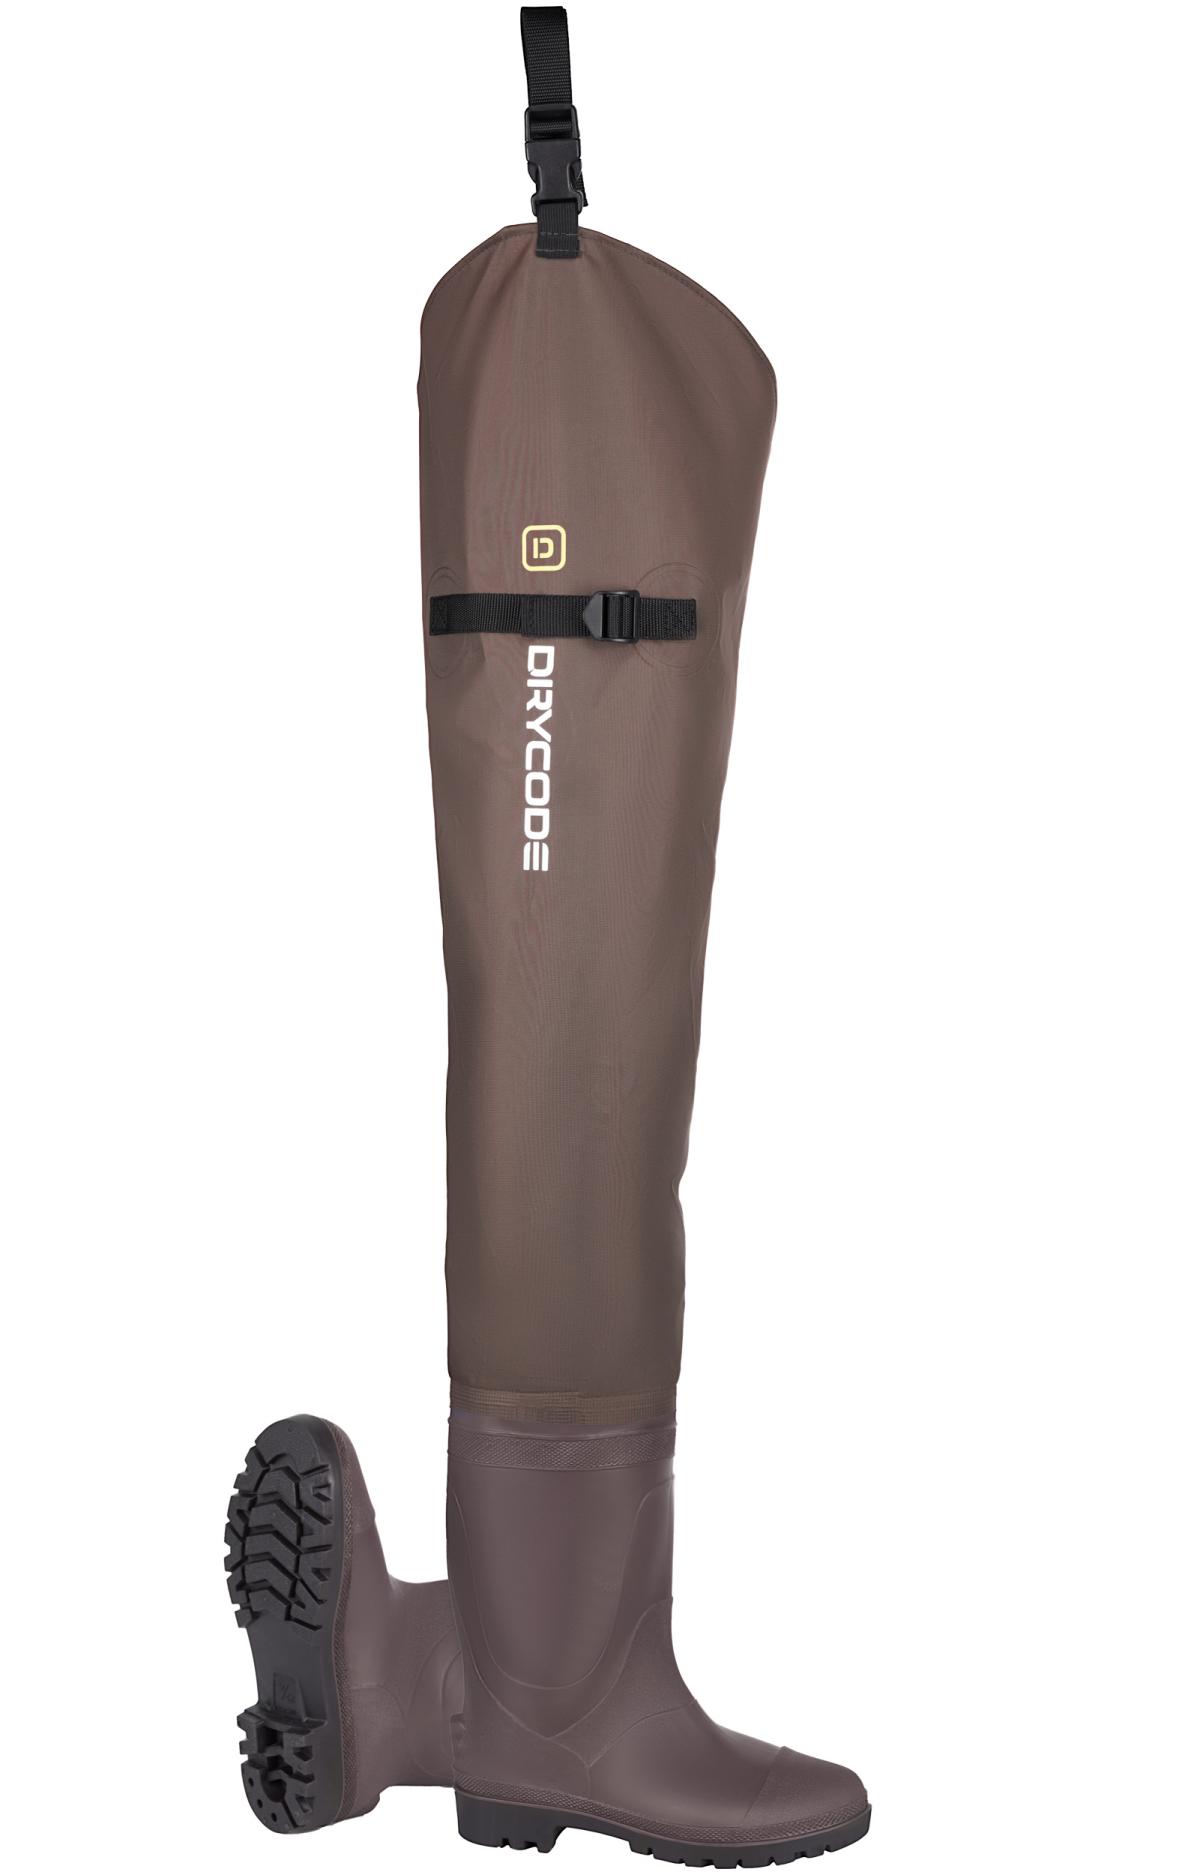 DRYCODE Hip Waders for Men, Waterproof Hip Boot for Women, With2-Ply PVC/Nylon